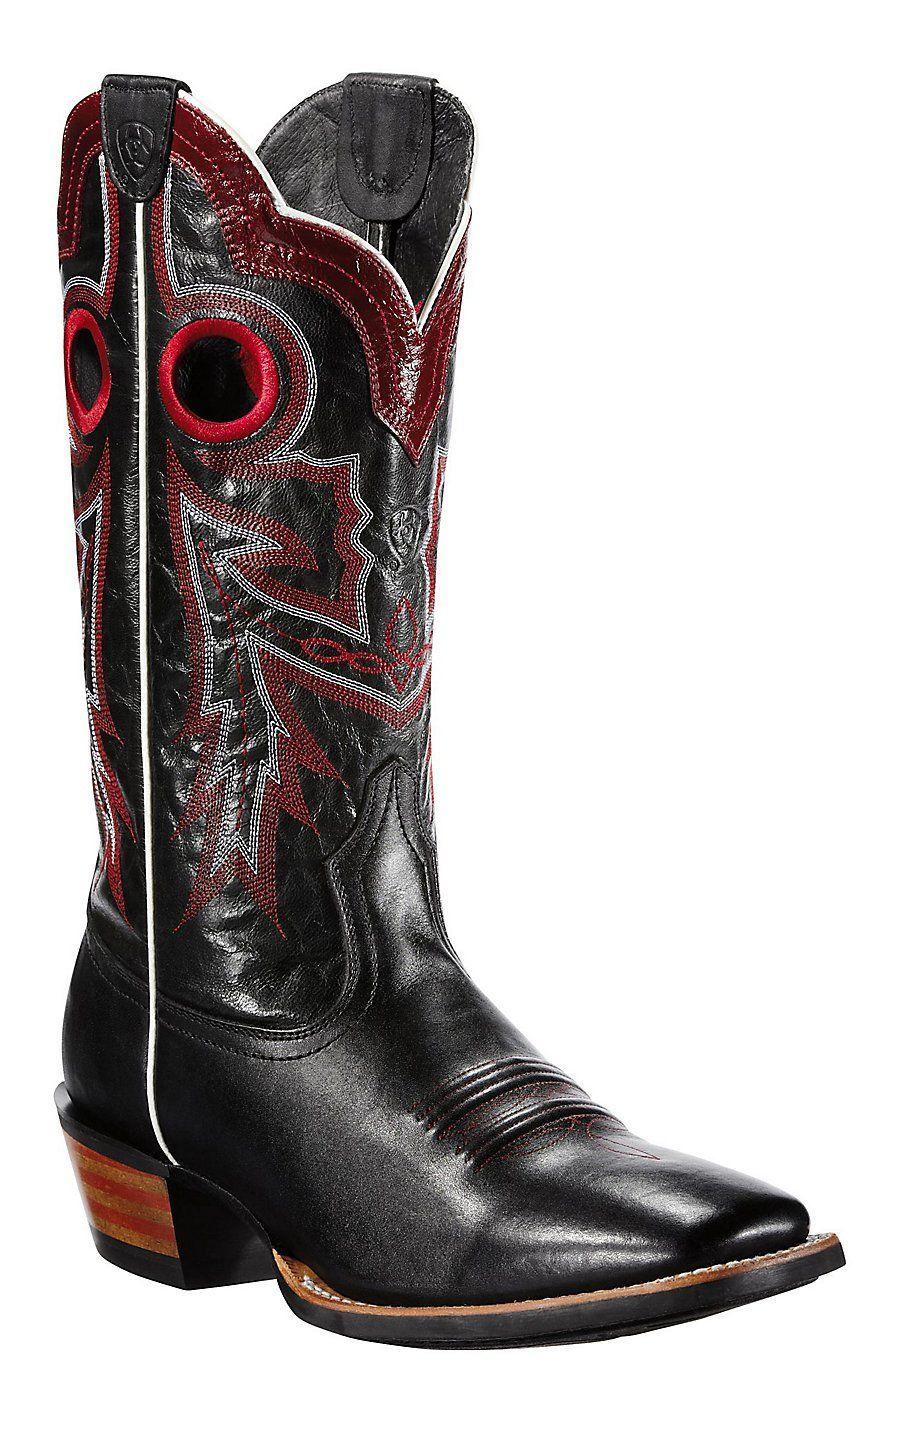 Red and Black Cowboy Logo - Ariat Wildstock Men's Black with Red Stitch Double Welt Square Toe